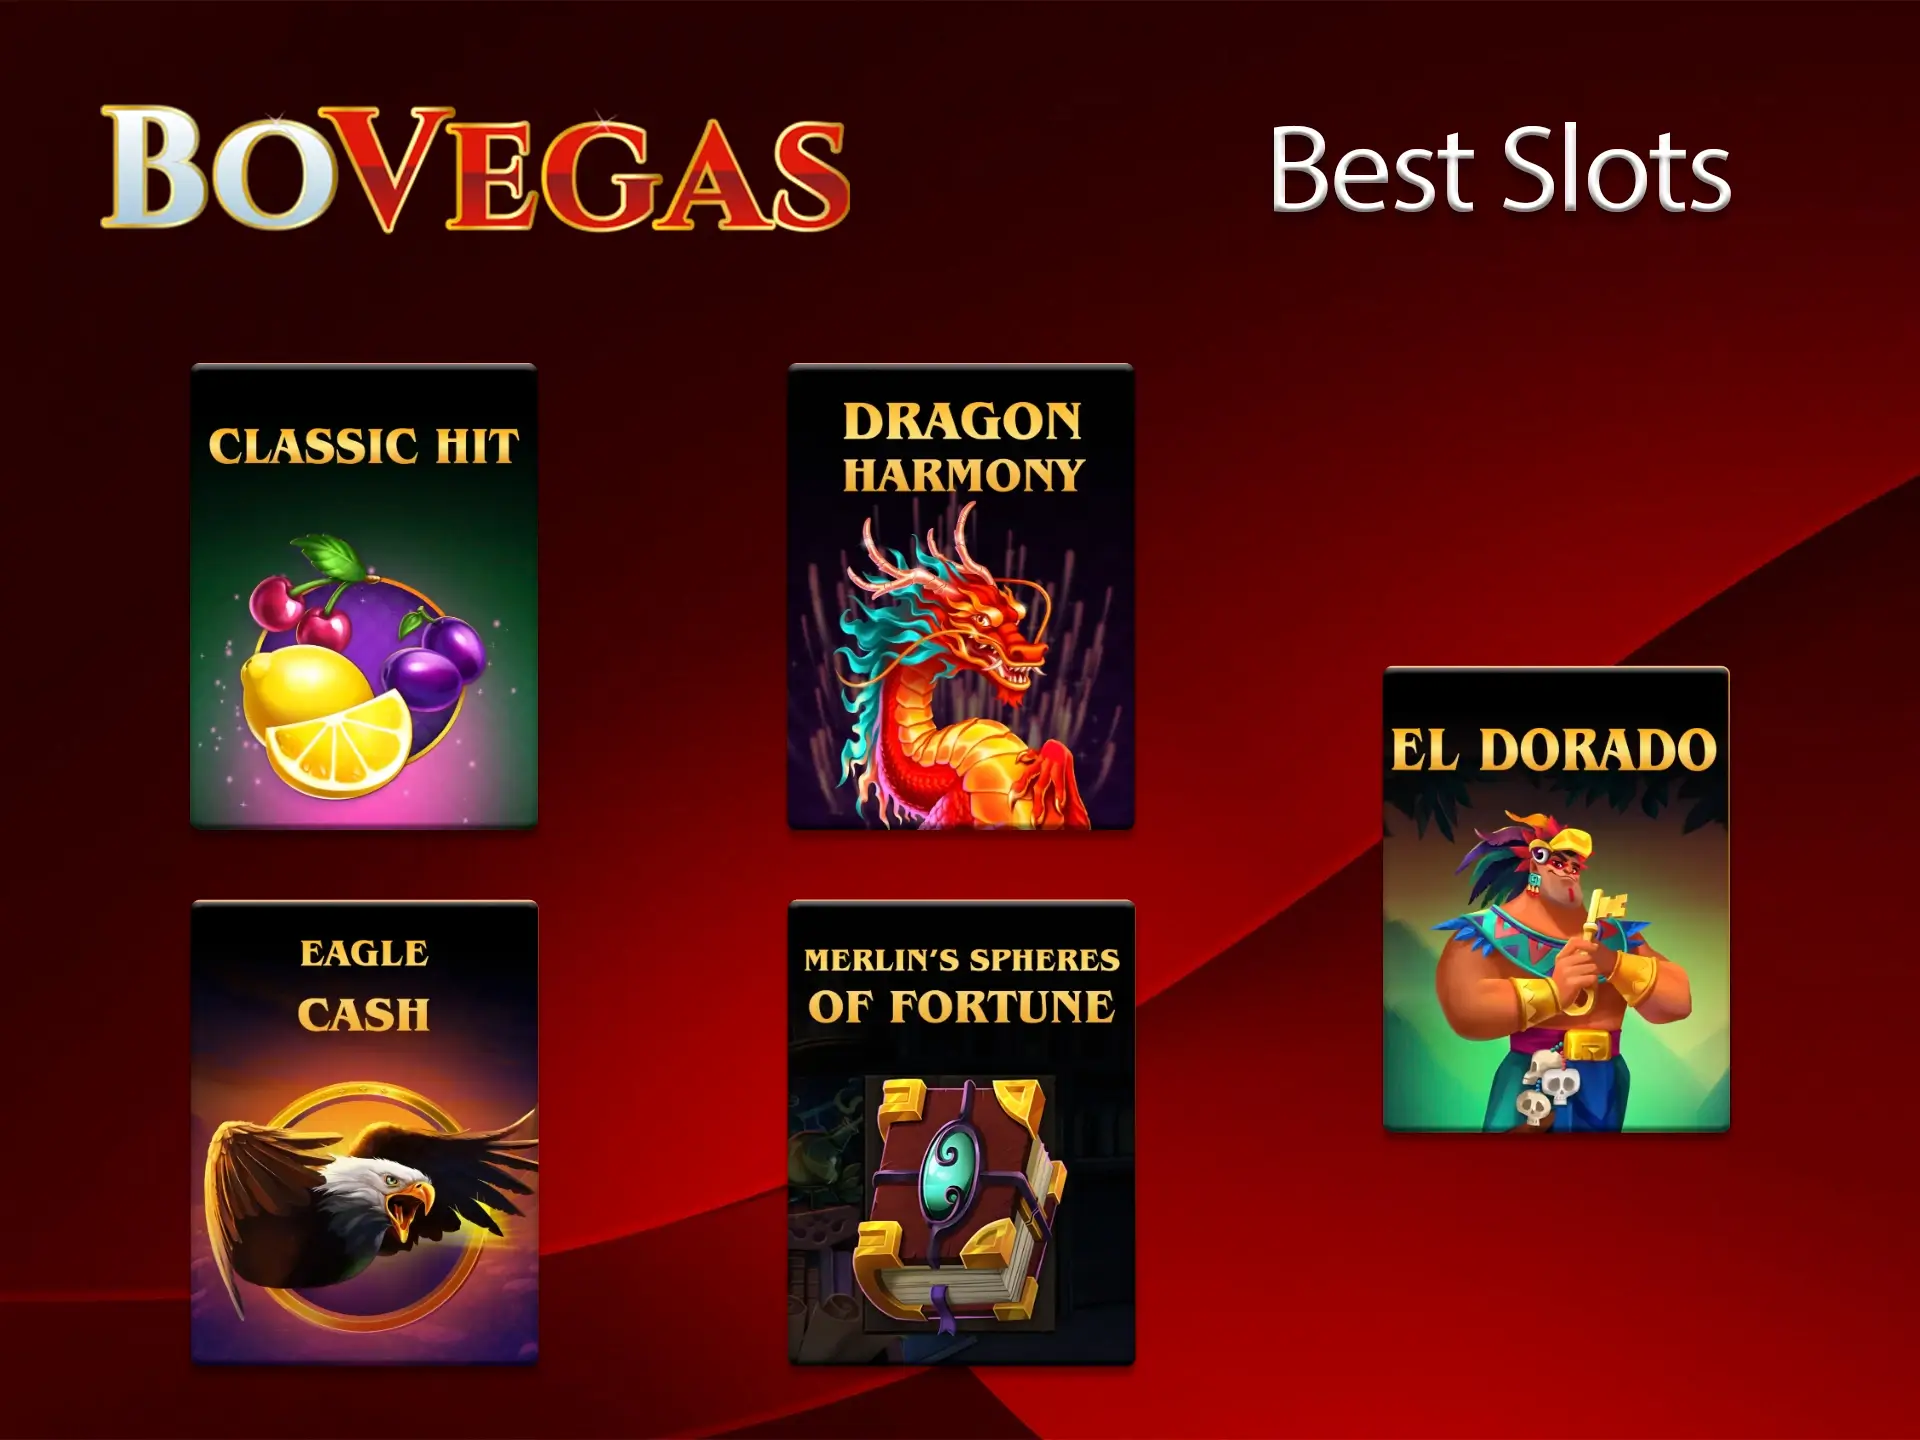 Play the best and most popular slots at BoVegas Casino.